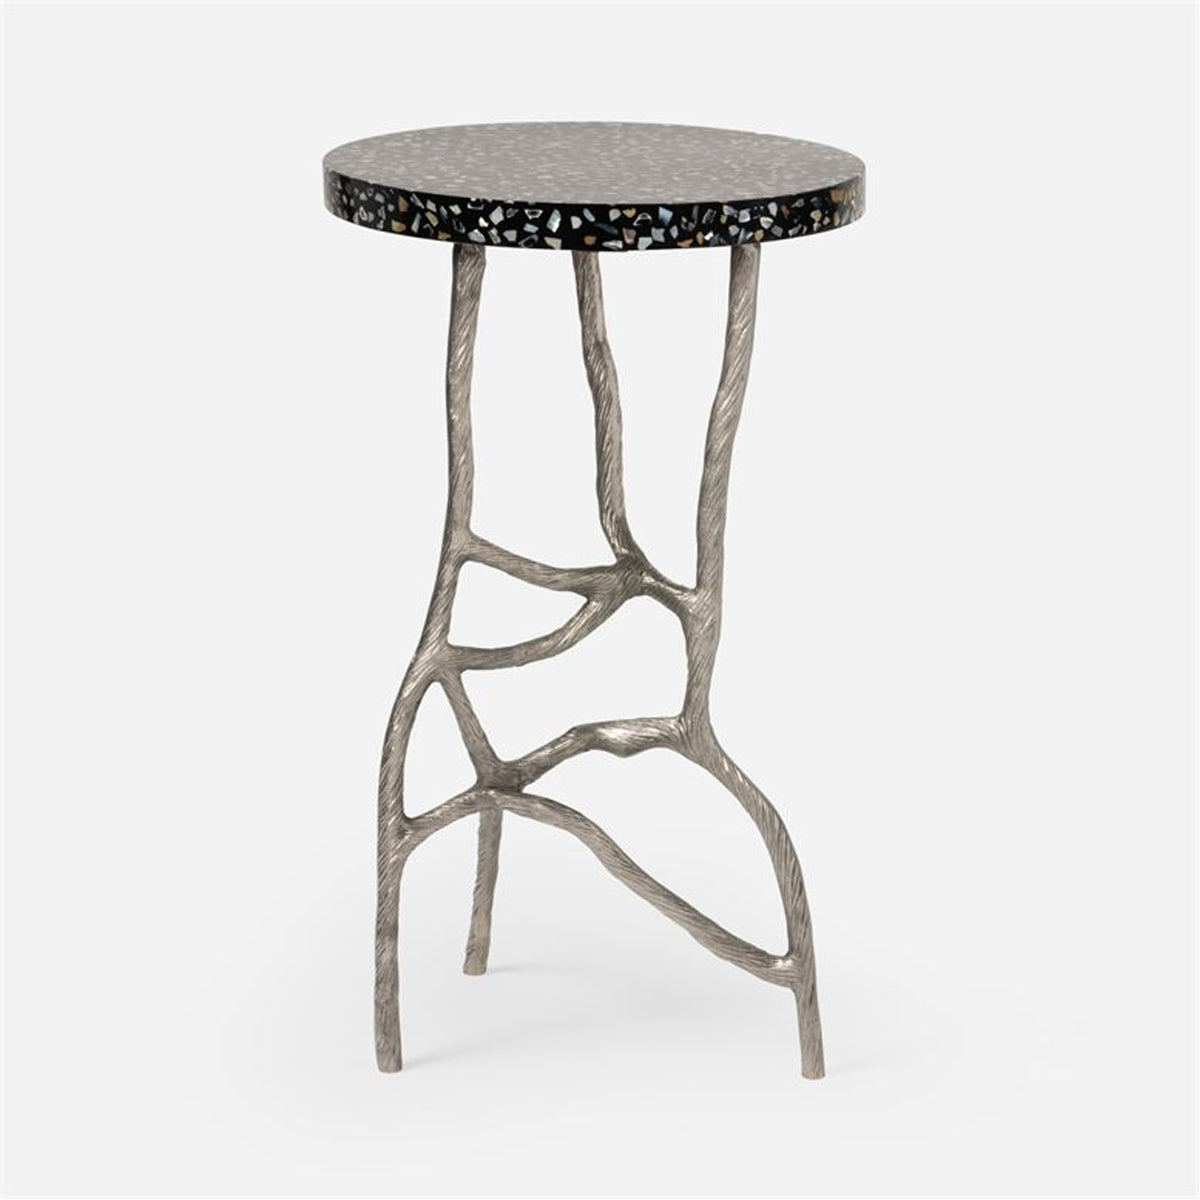 Made Goods Genevier Brass Tripod Base Side Table in Resin/Mop Shell